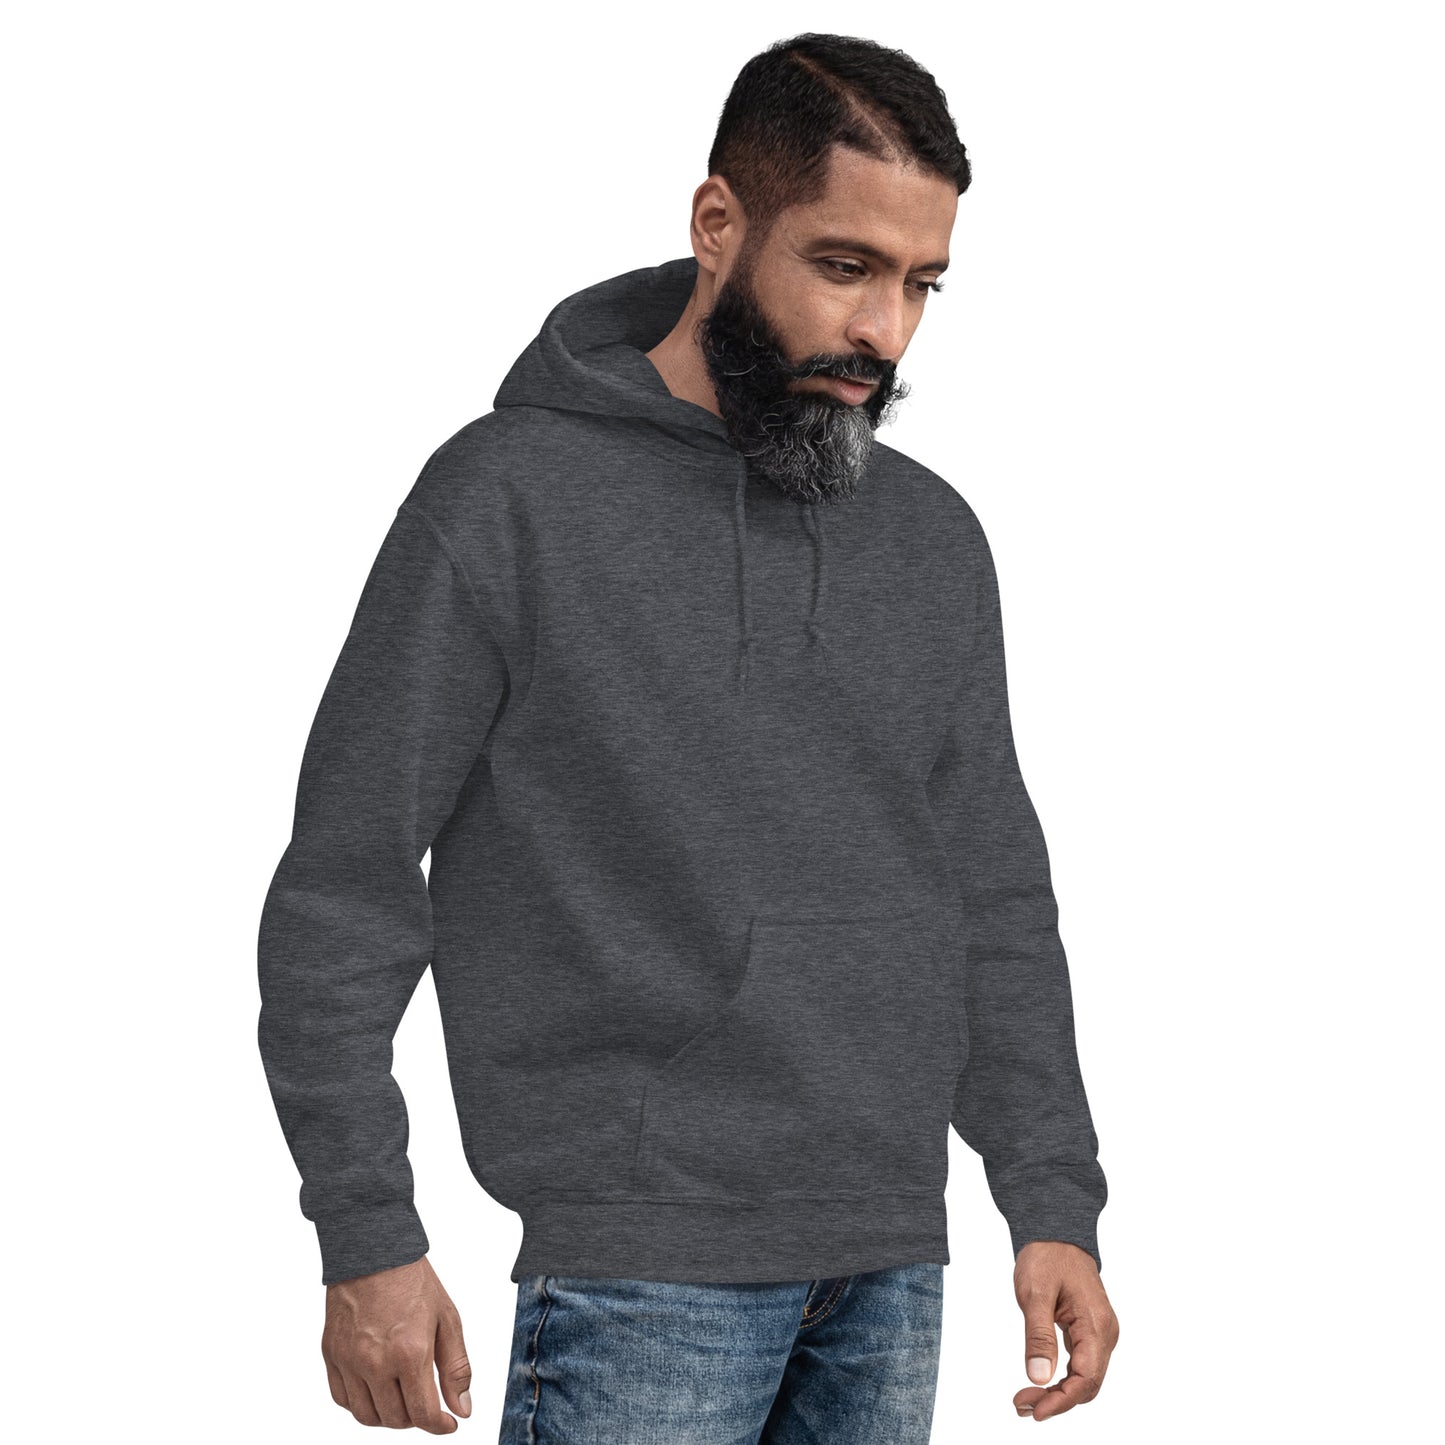  Unisex Hoodie - Dark Heather/Grey - Front view being warn by man with his arms by his side - Byron Bay design on back, plain front with pouch pocket - Genuine Byron Bay Merchandise | Produced by Go Sea Kayak Byron Bay 